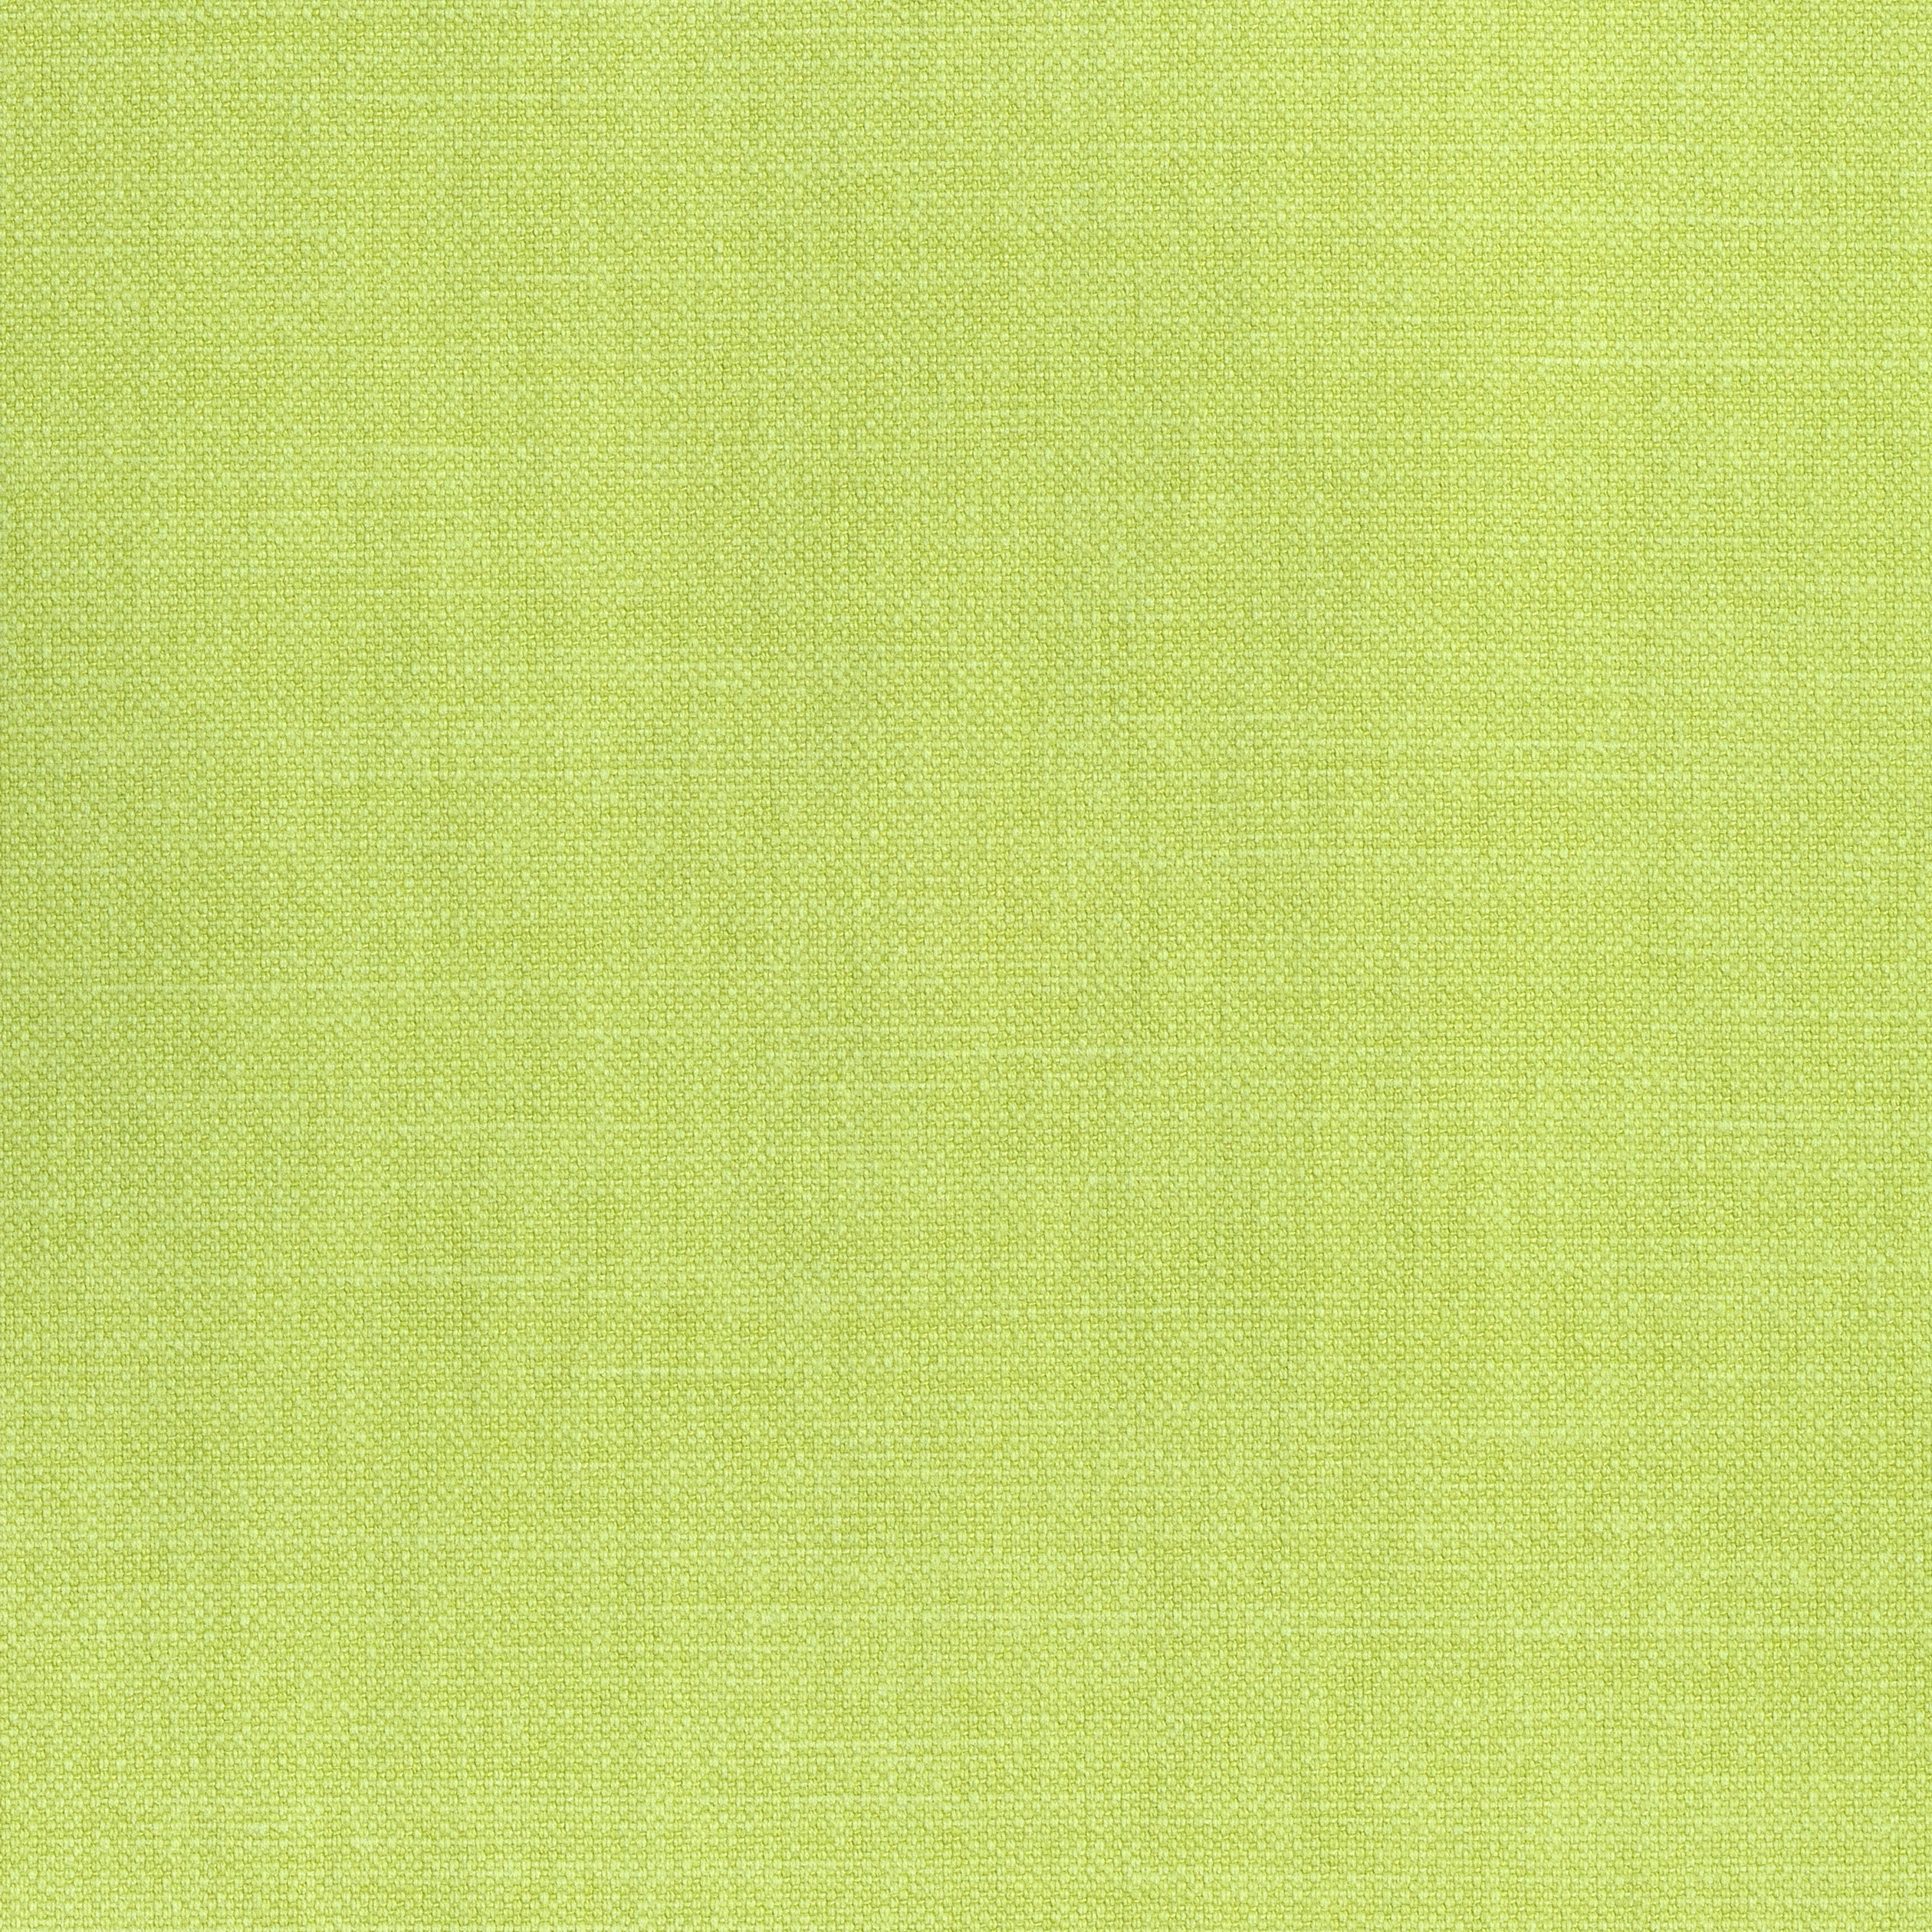 Prisma fabric in spring green color - pattern number W70139 - by Thibaut in the Woven Resource Vol 12 Prisma Fabrics collection